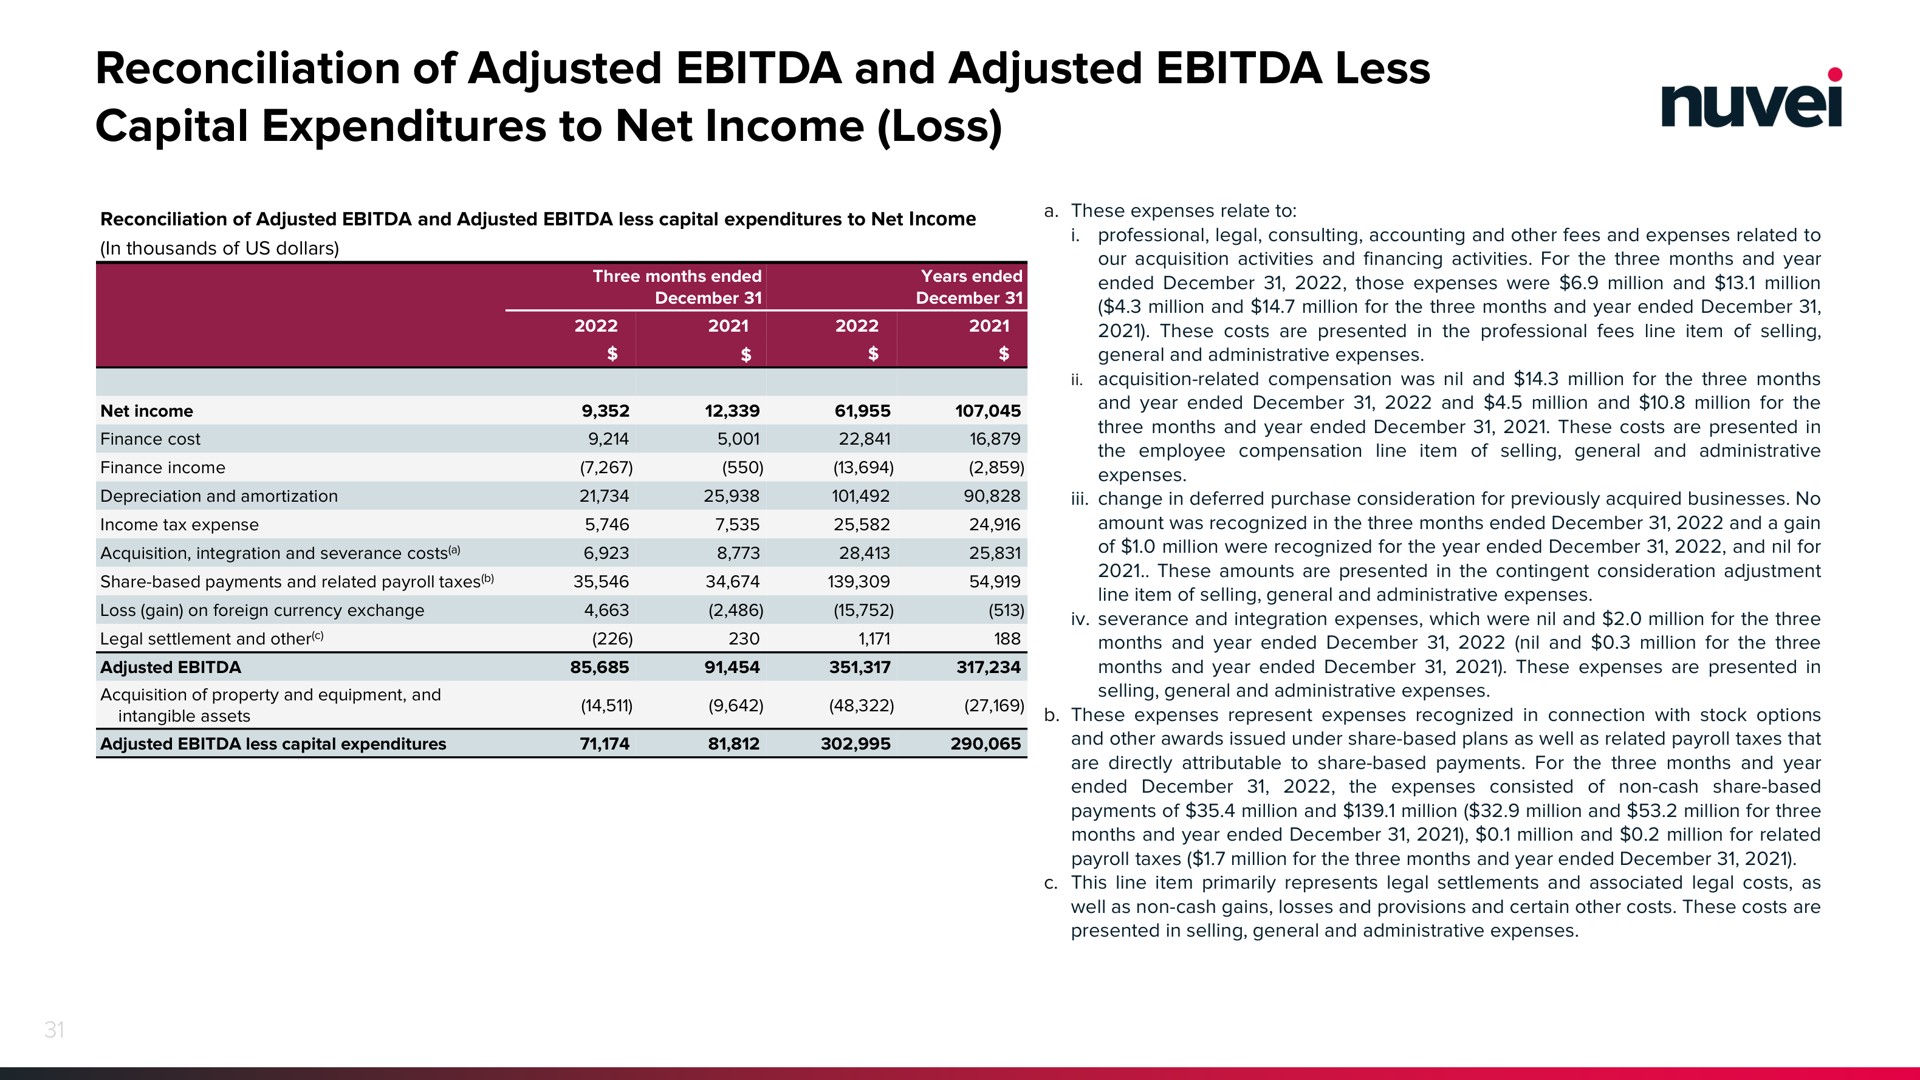 reconciliation of adjusted and adjusted less capital expenditures to net income loss | Nuvei